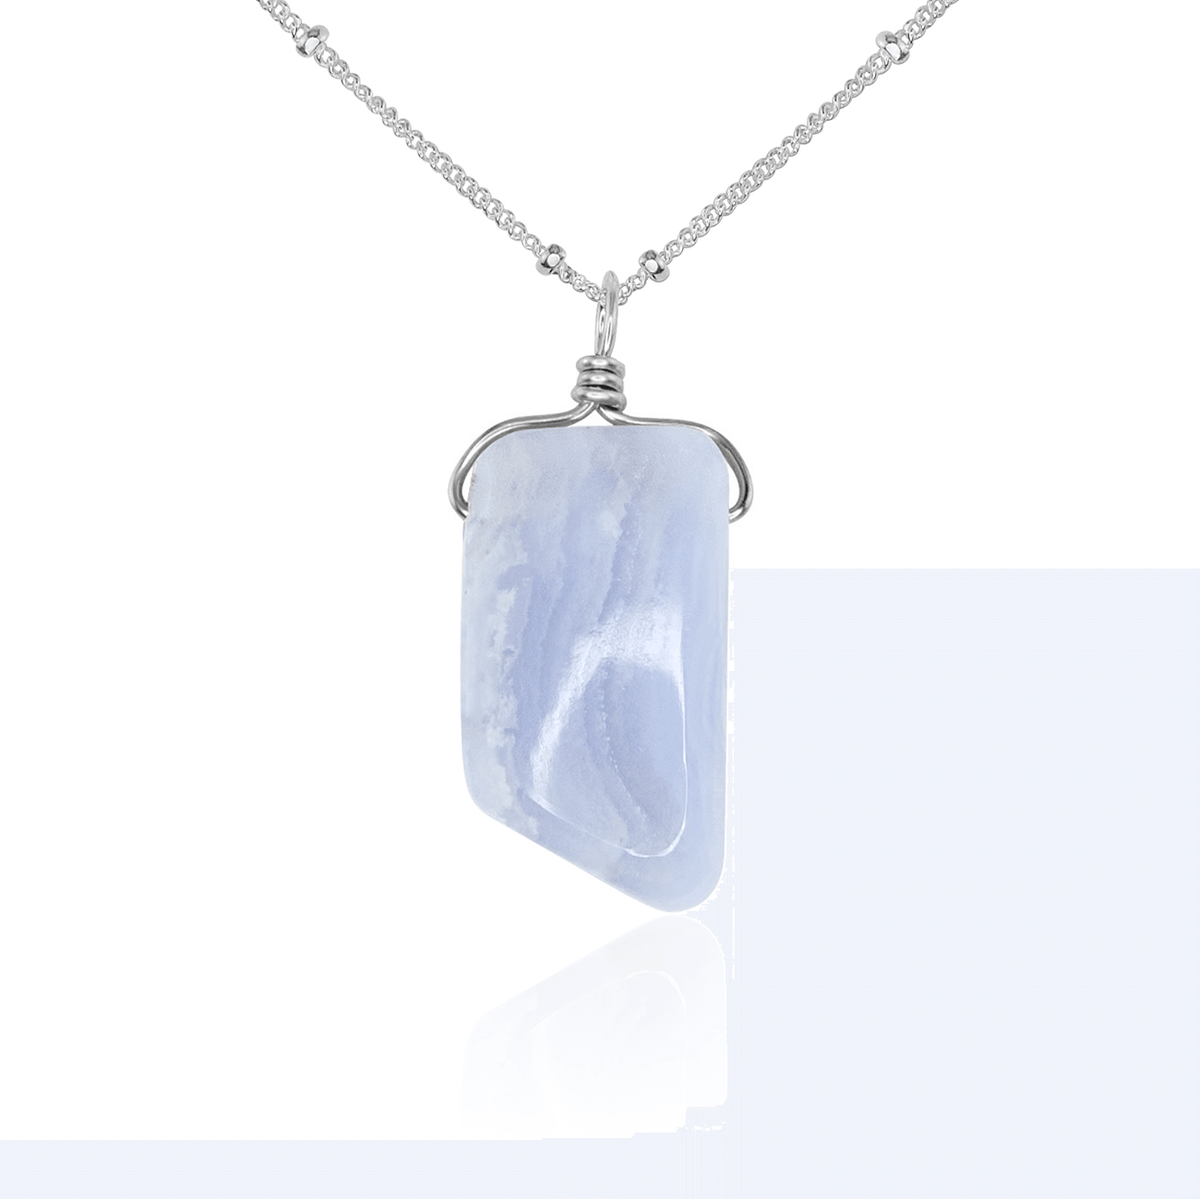 Small Smooth Blue Lace Agate Gentle Point Crystal Pendant Necklace - Small Smooth Blue Lace Agate Gentle Point Crystal Pendant Necklace - Sterling Silver / Satellite - Luna Tide Handmade Crystal Jewellery